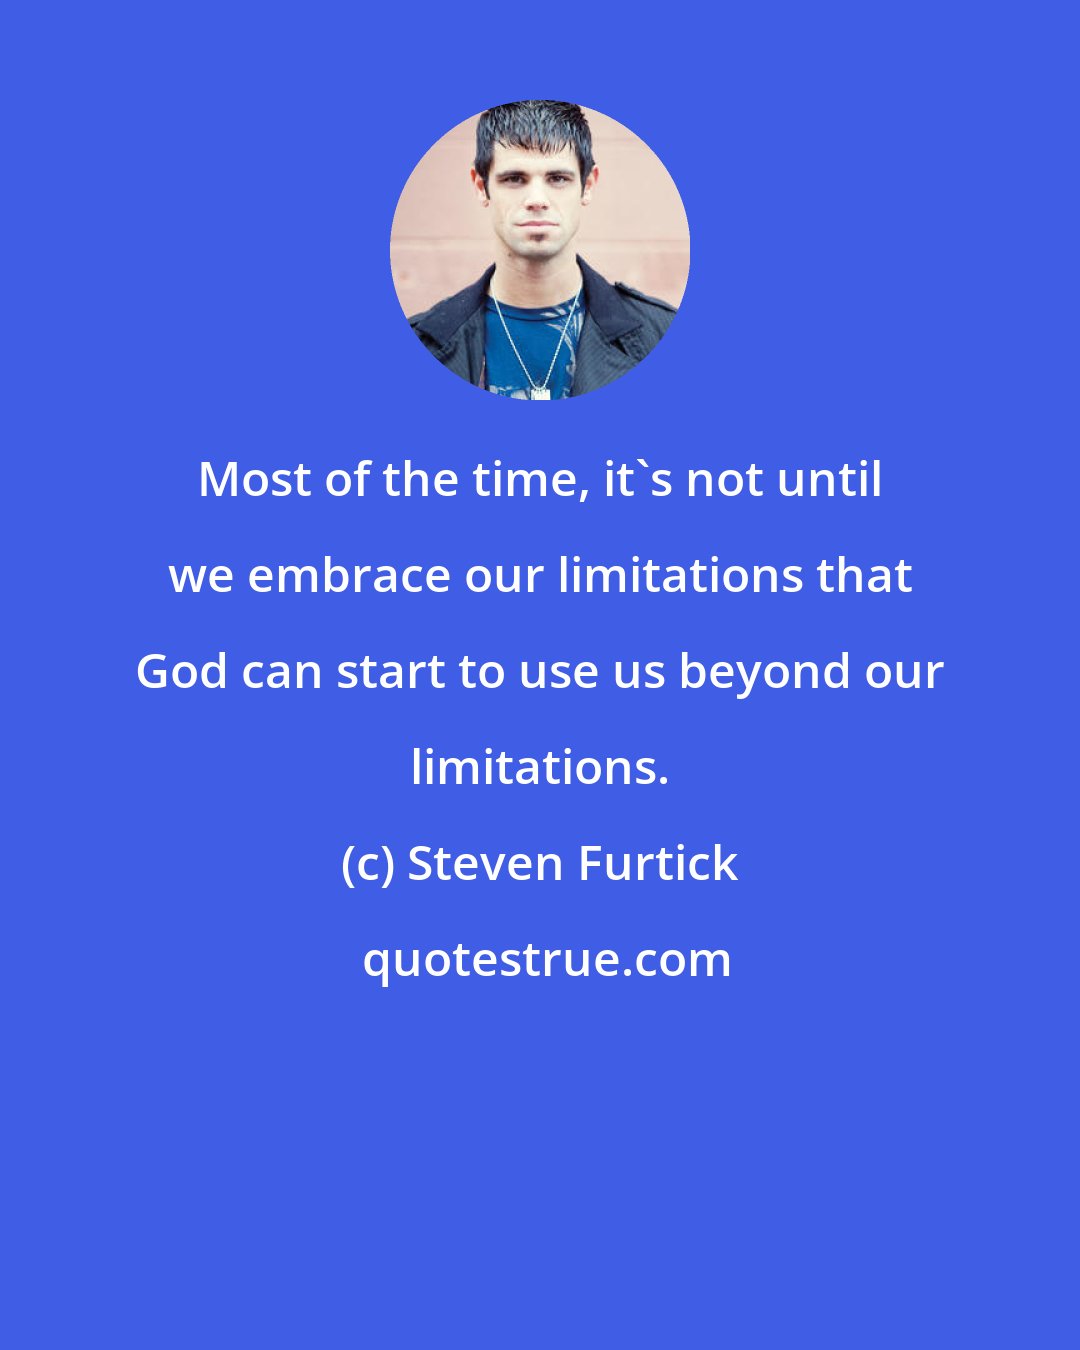 Steven Furtick: Most of the time, it's not until we embrace our limitations that God can start to use us beyond our limitations.